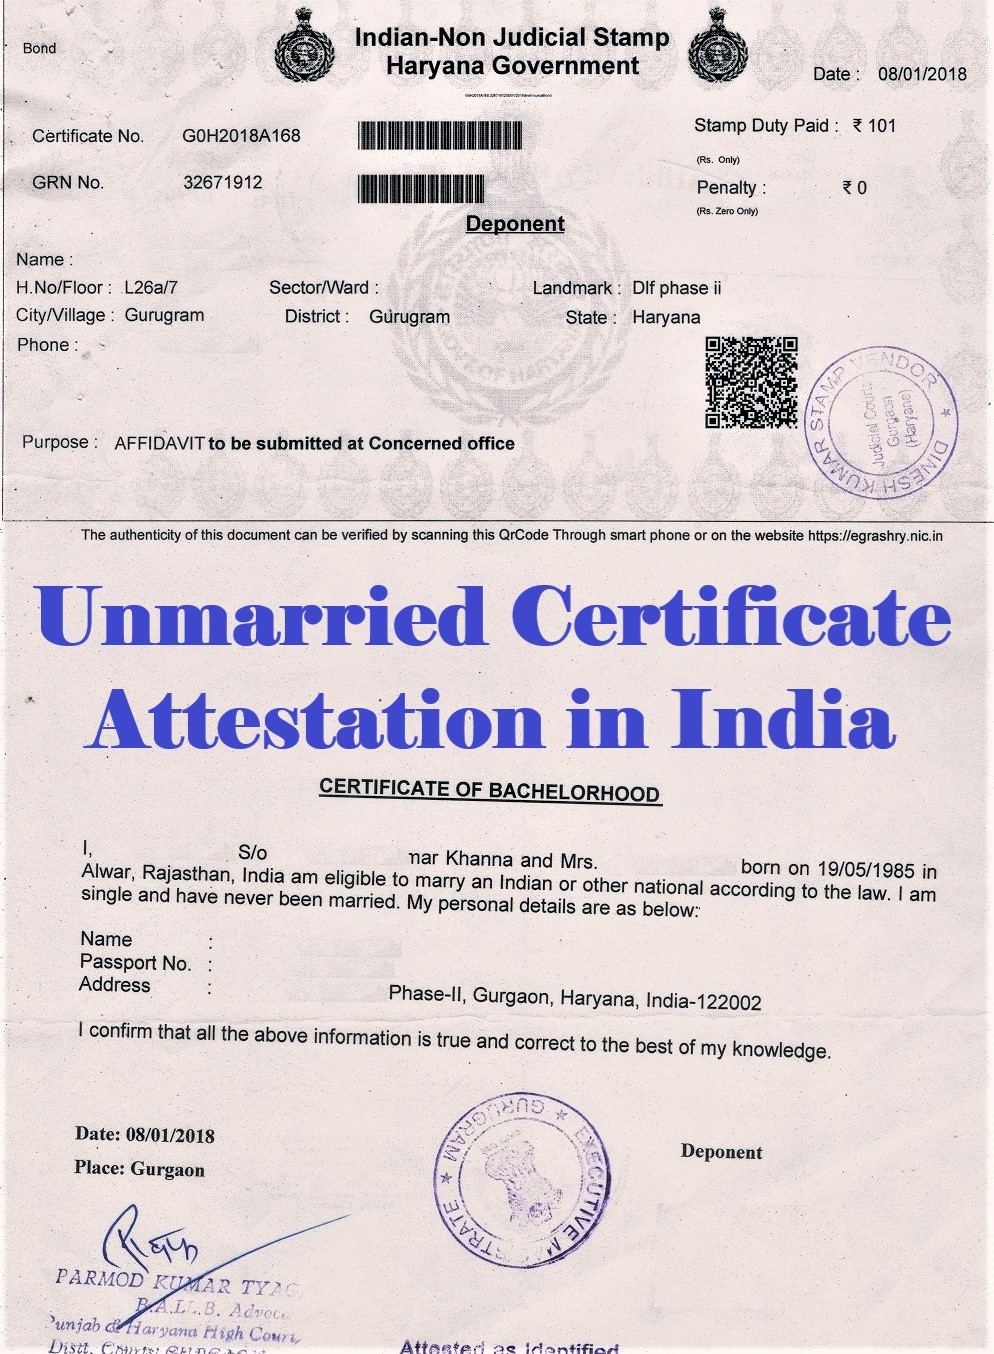 Unmarried Certificate Attestation from Chad Embassy